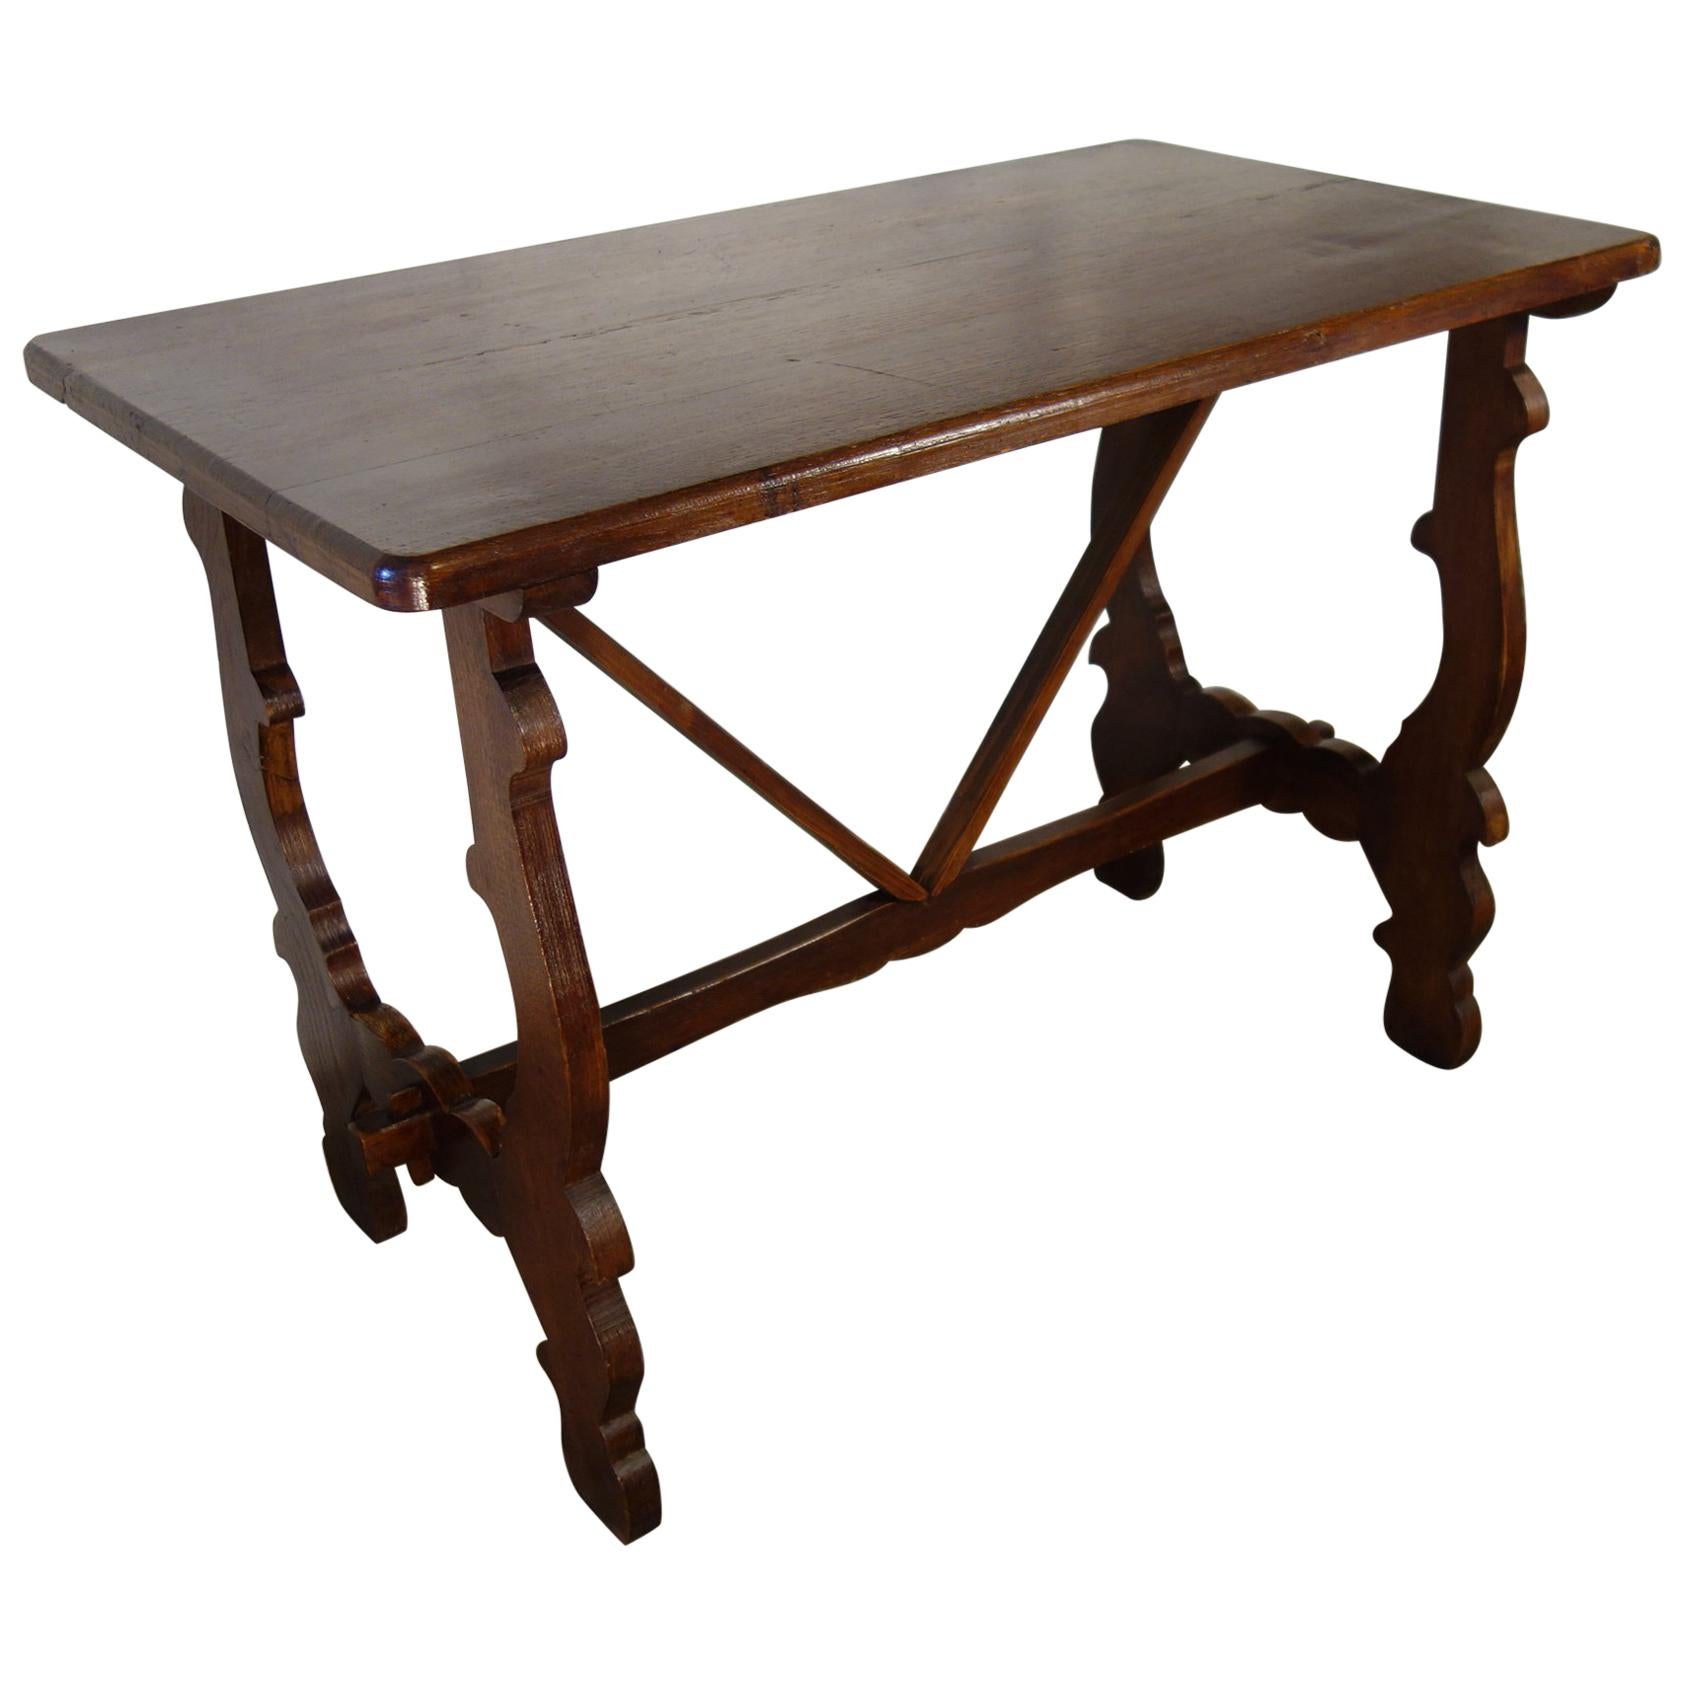 Antique Italian Tuscan Renaissance Refectory Style Hand Crafted Oak Farm Table For Sale